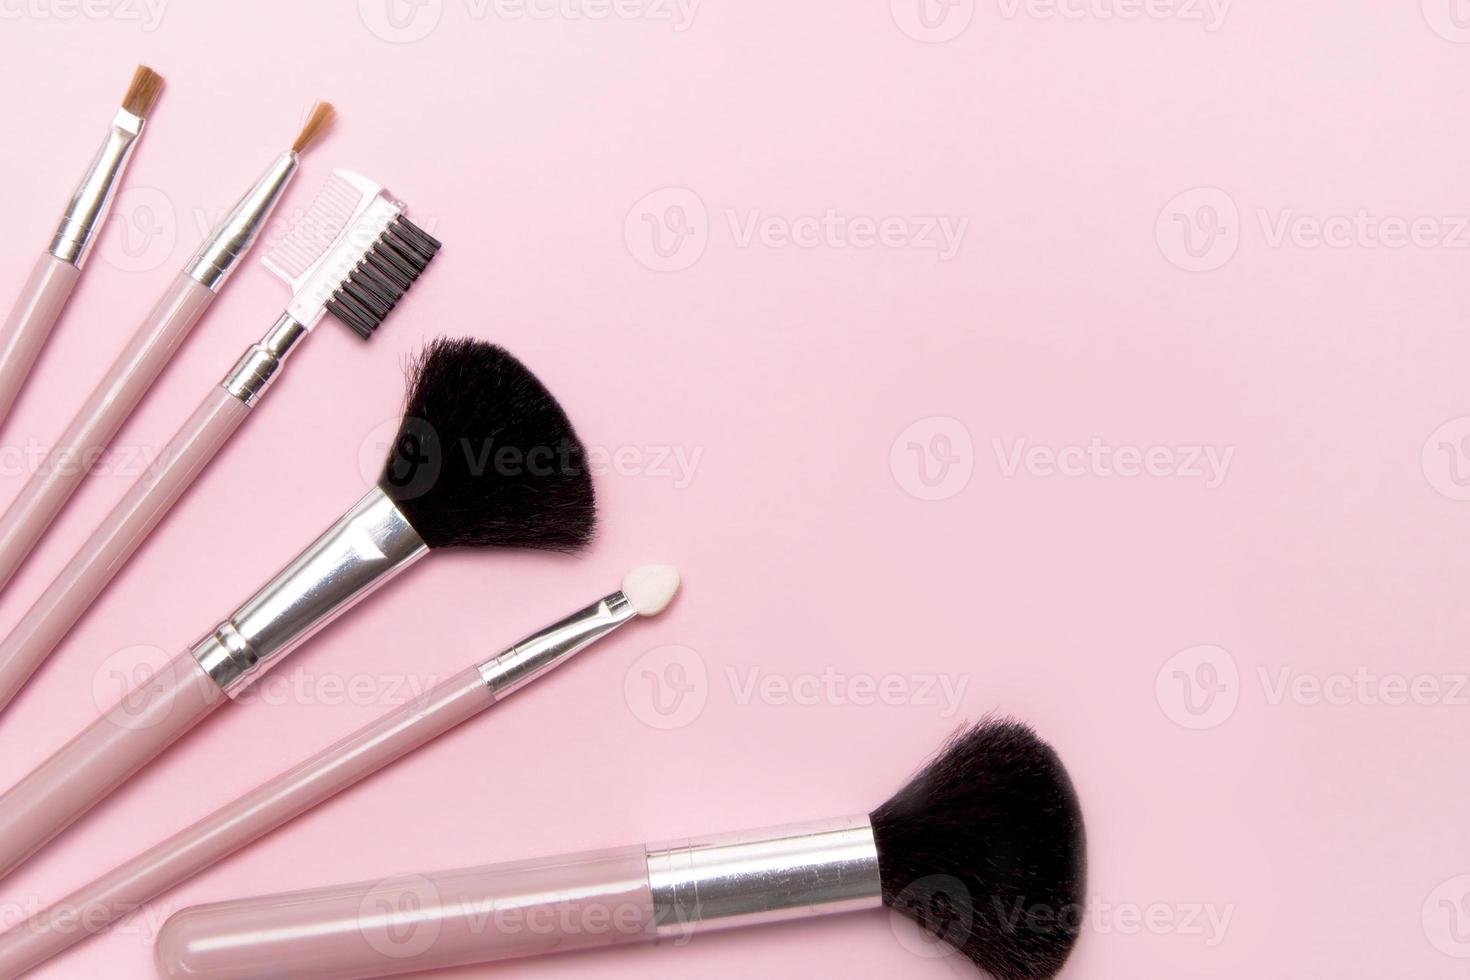 makeup brushes on pink background with place for text and advertising photo